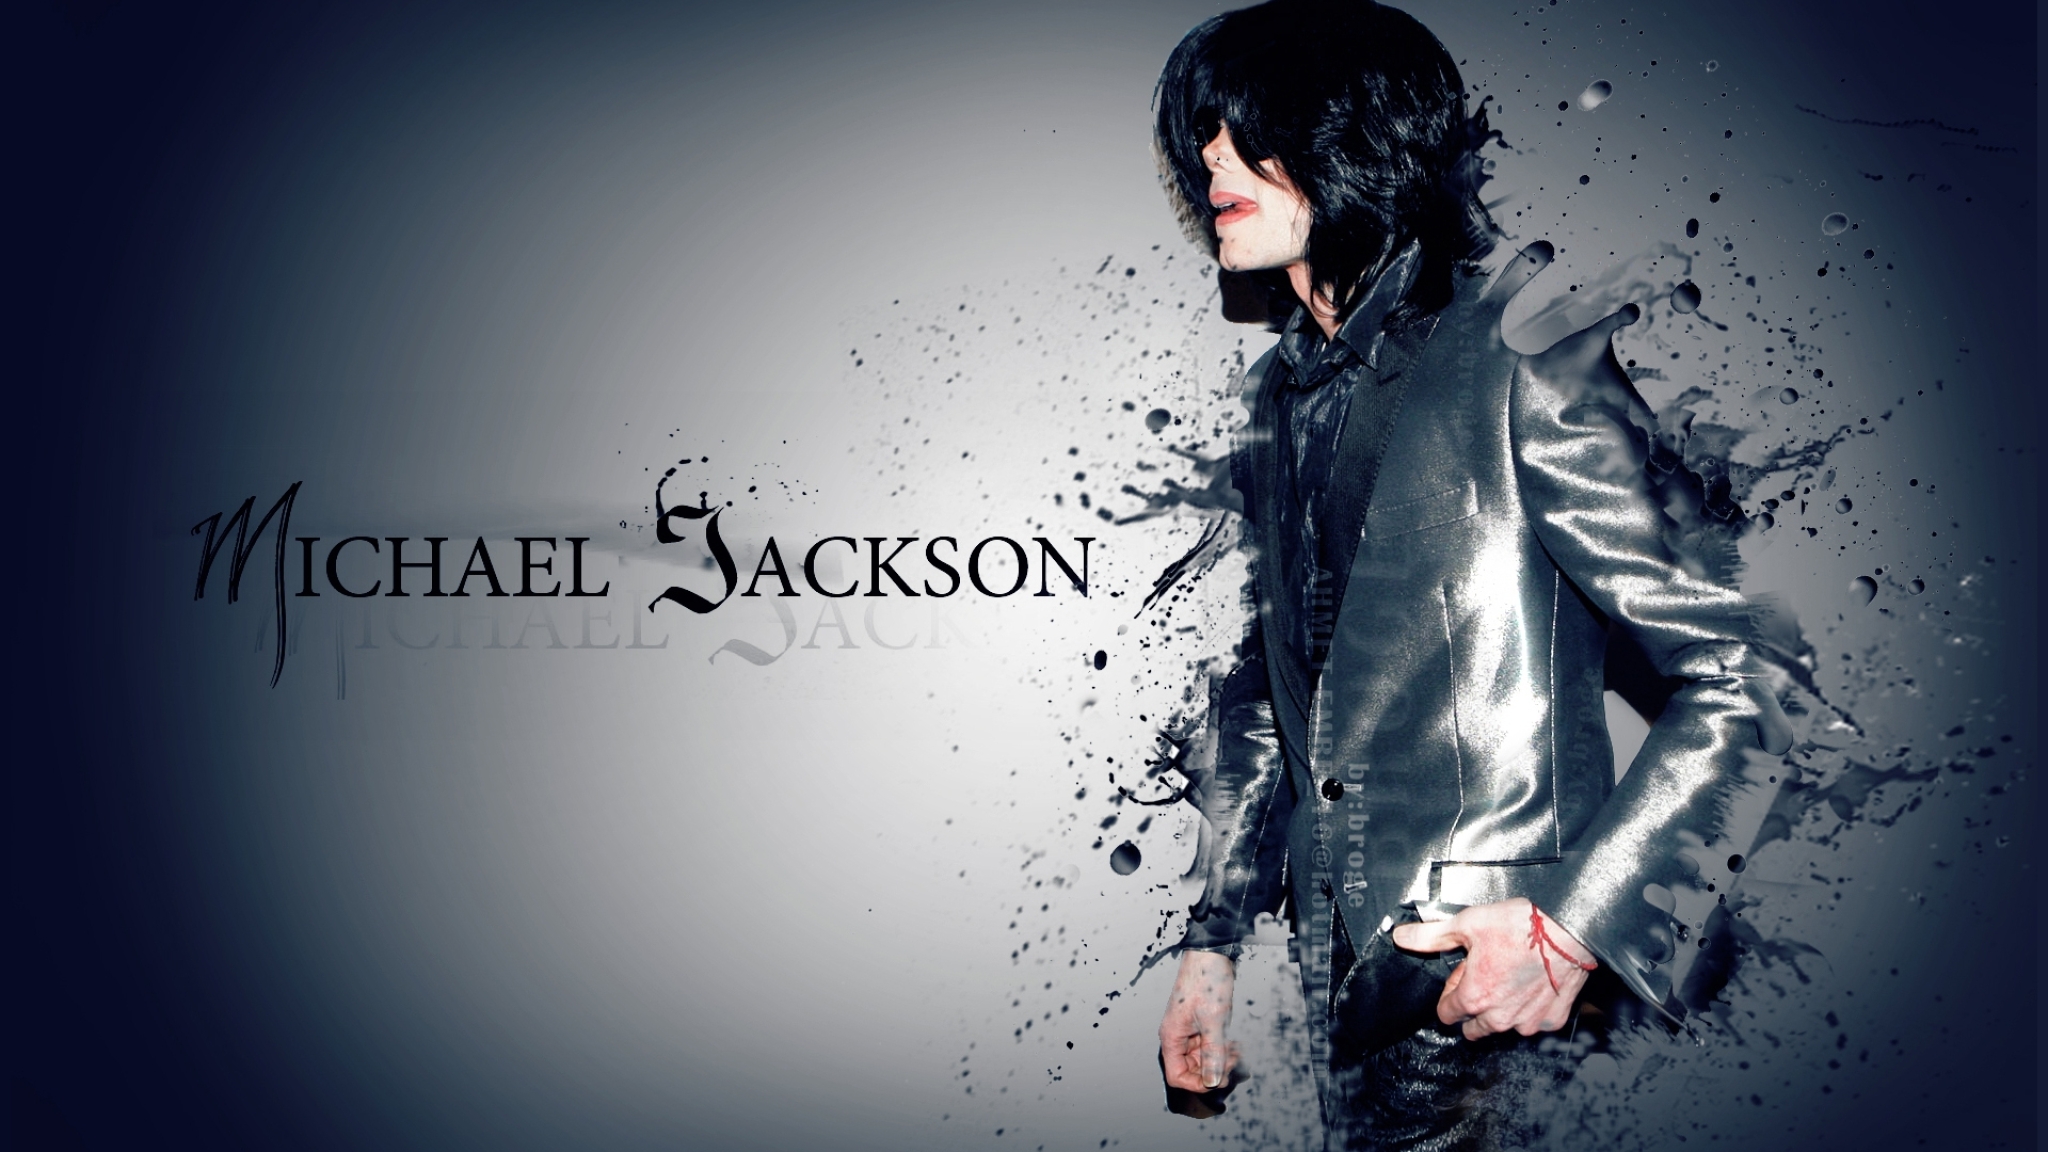 48x1152 Michael Jackson Glamorous Wallpapers 48x1152 Resolution Wallpaper Hd Celebrities 4k Wallpapers Images Photos And Background Wallpapers Den